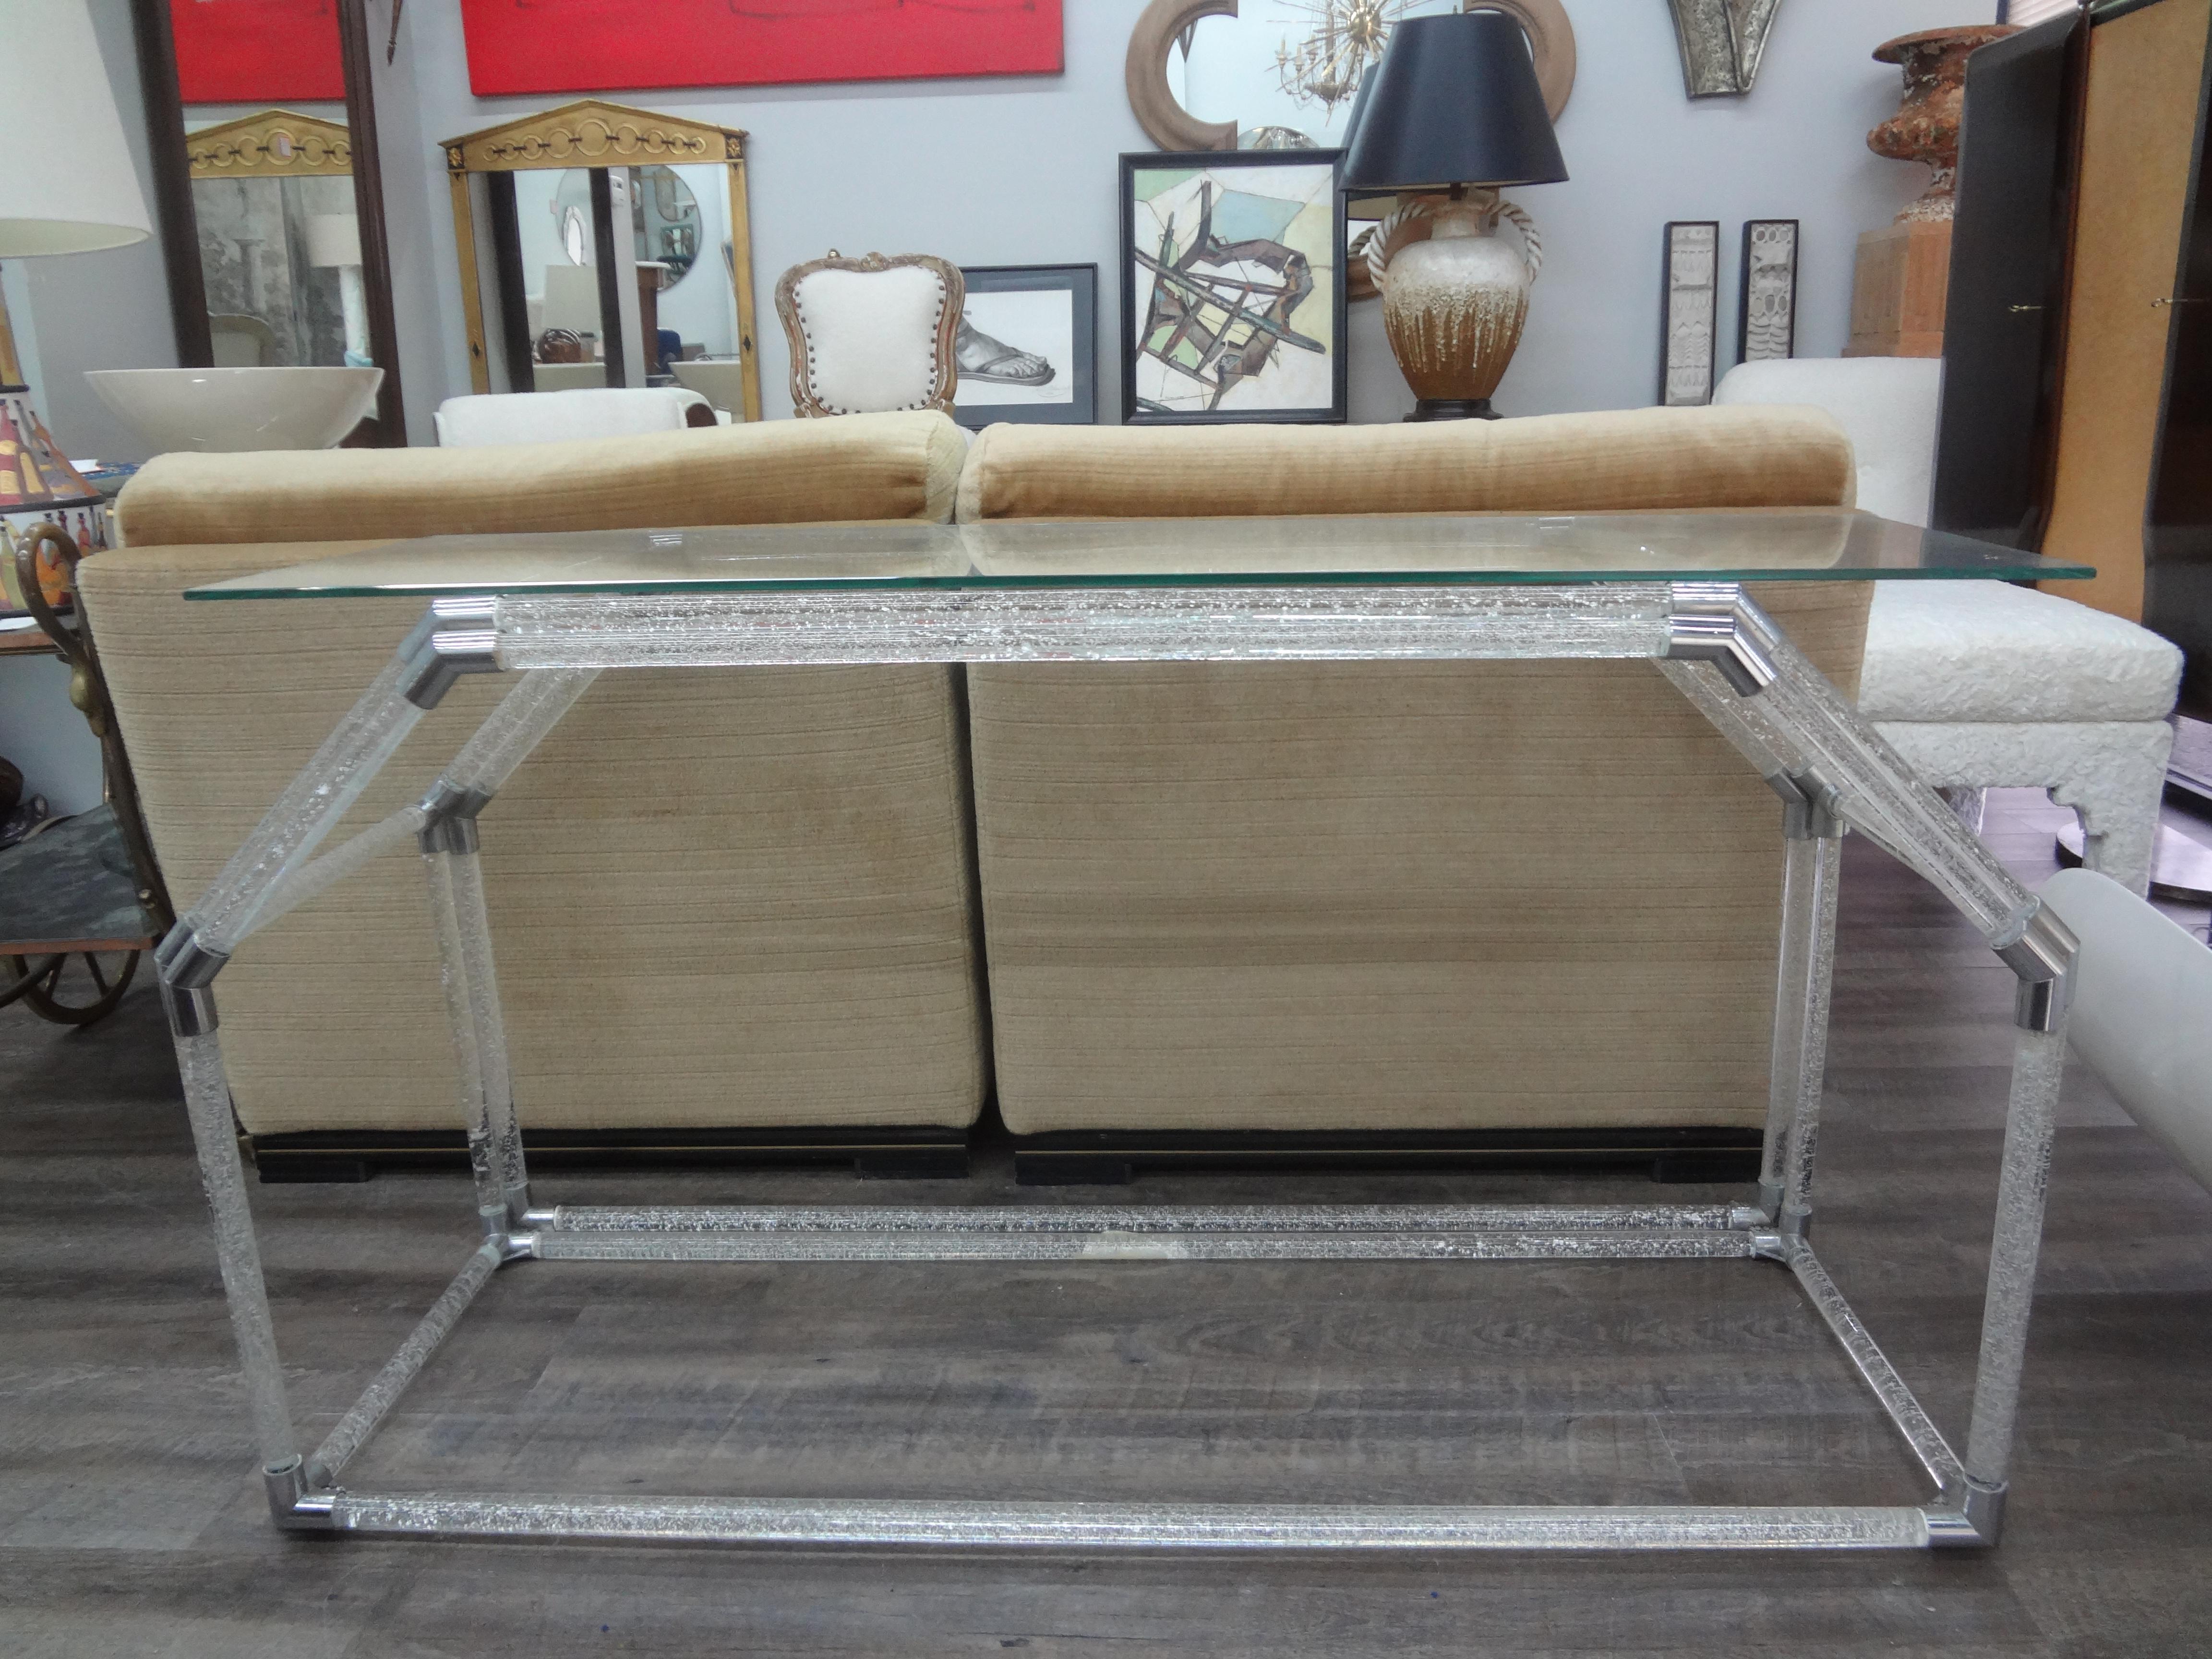 Murano Glass Console Table By Seguso.
This stunning and unusual console table is made of clear Murano glass rods with silver flecks and chrome fittings.
The console dimensions:
54.25 inches console only
51.75 inches including glass top.
This